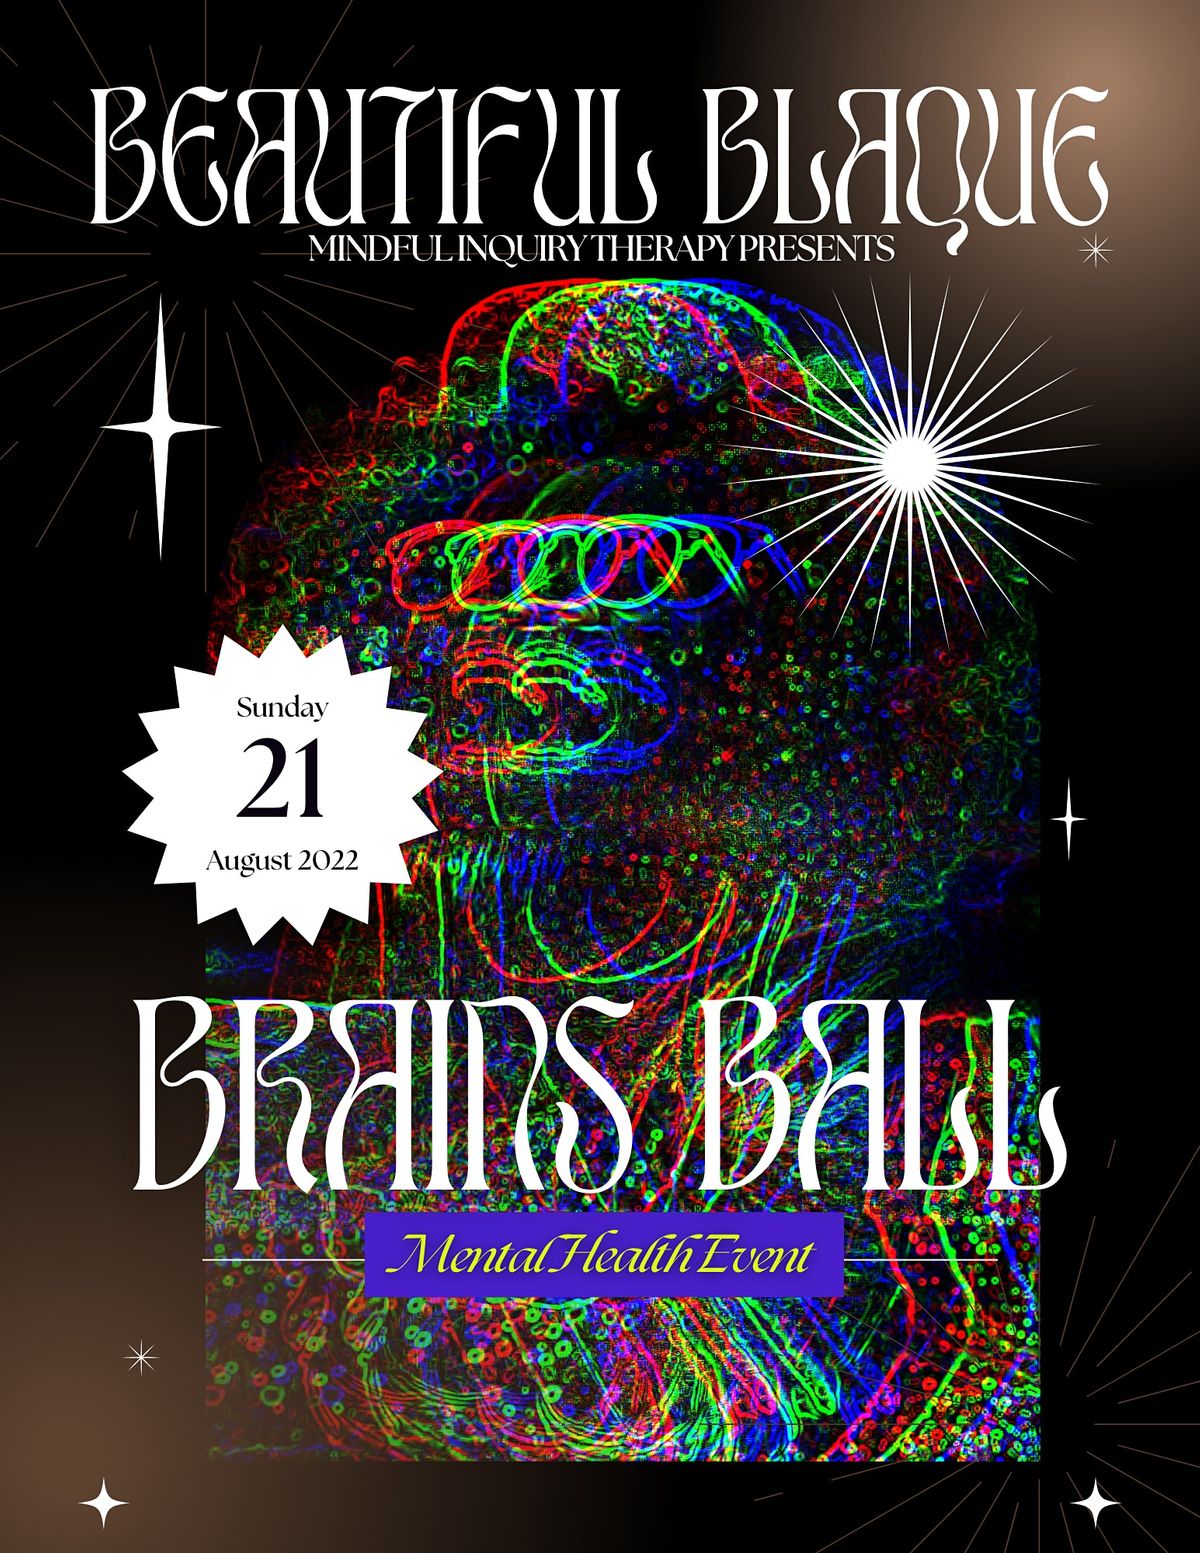 Mindful Inquiry Therapy Presents: Beautiful Blaque Brains Ball